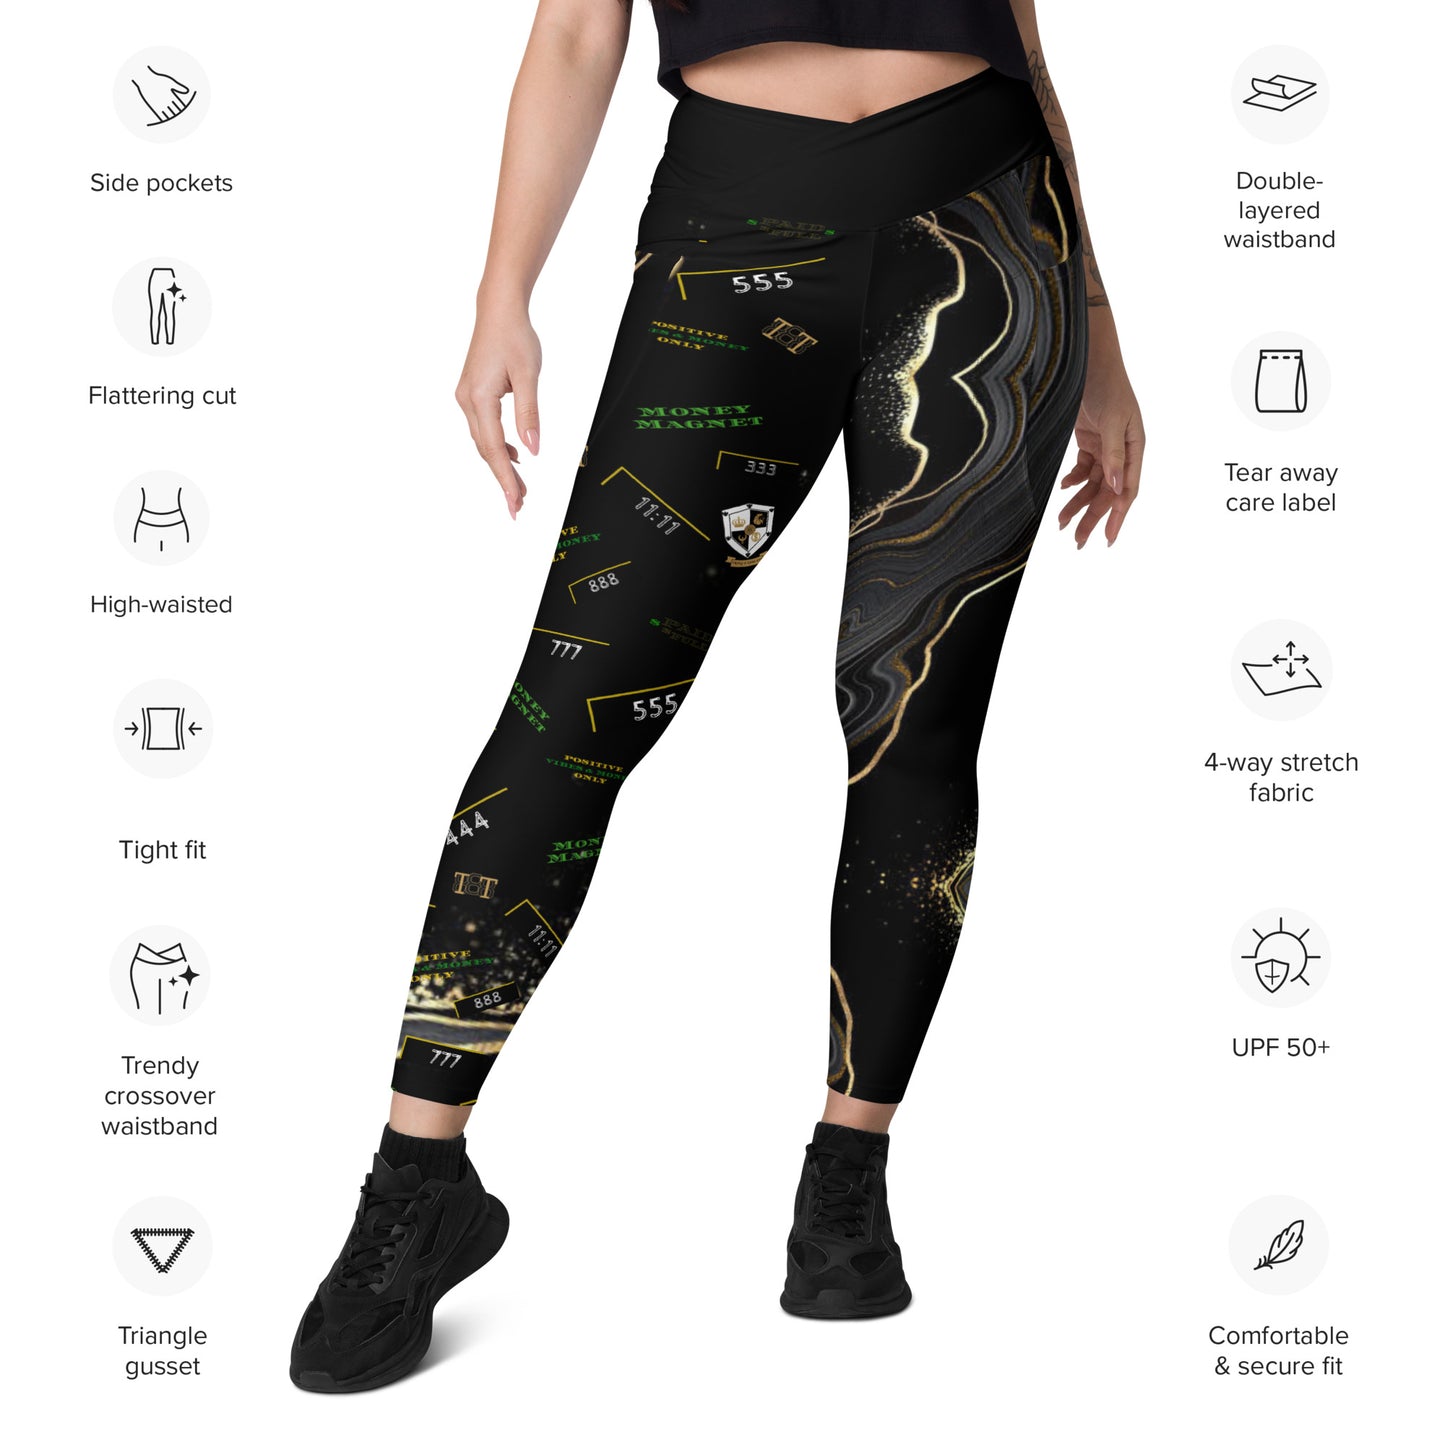 8xquiZit Collection - Women's Manifestation Deep Black N Gold Crossover leggings with pockets